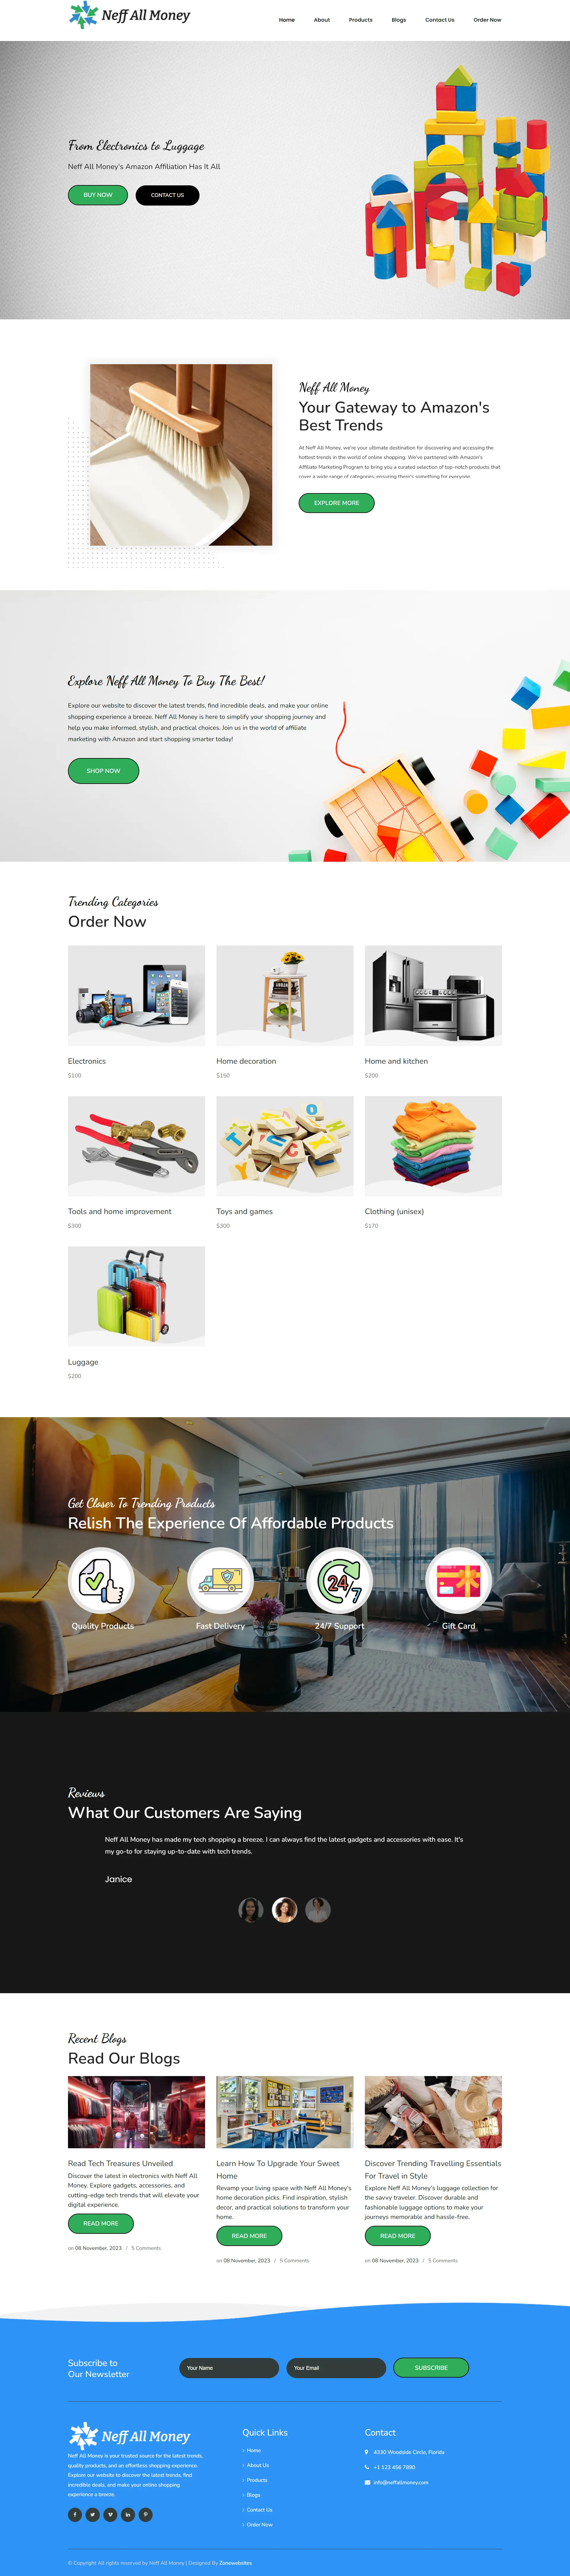 Premium-Quality Products for Online Shopping Website Design